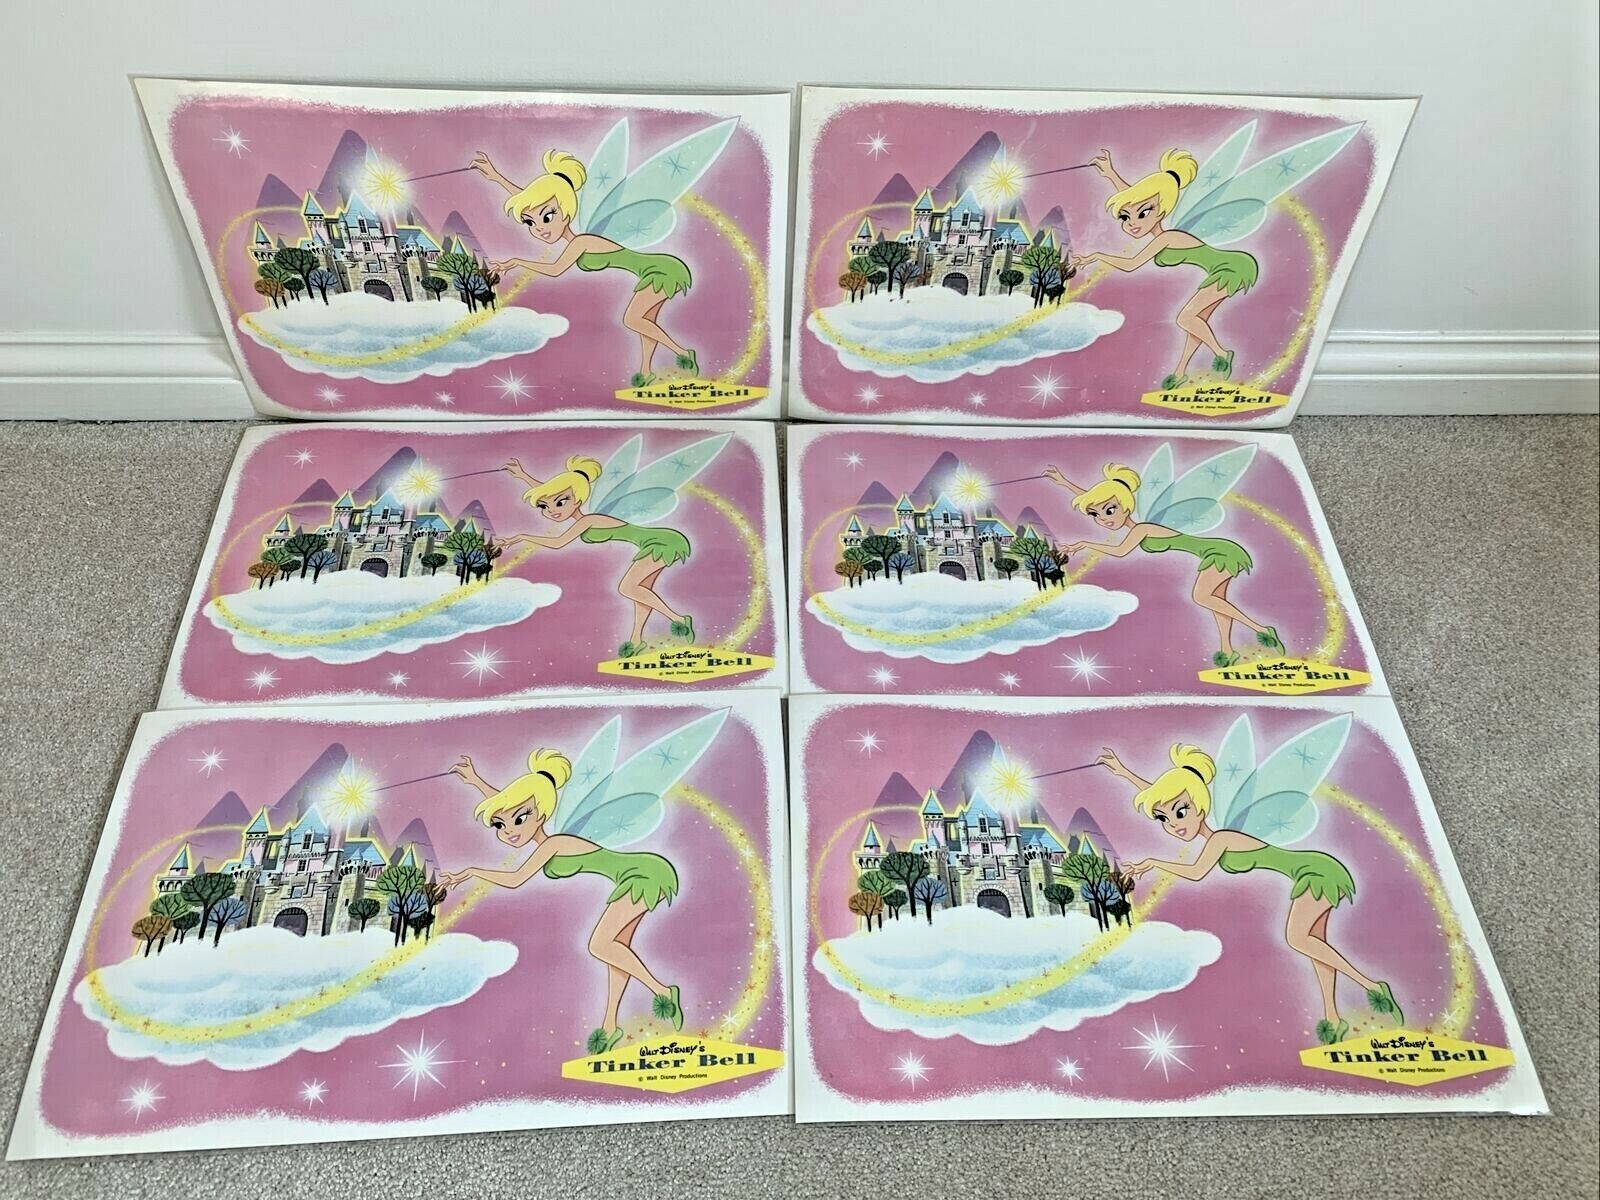 Lot of 6 Vintage Place Mats Disney Productions Tinker Bell 17x11.5